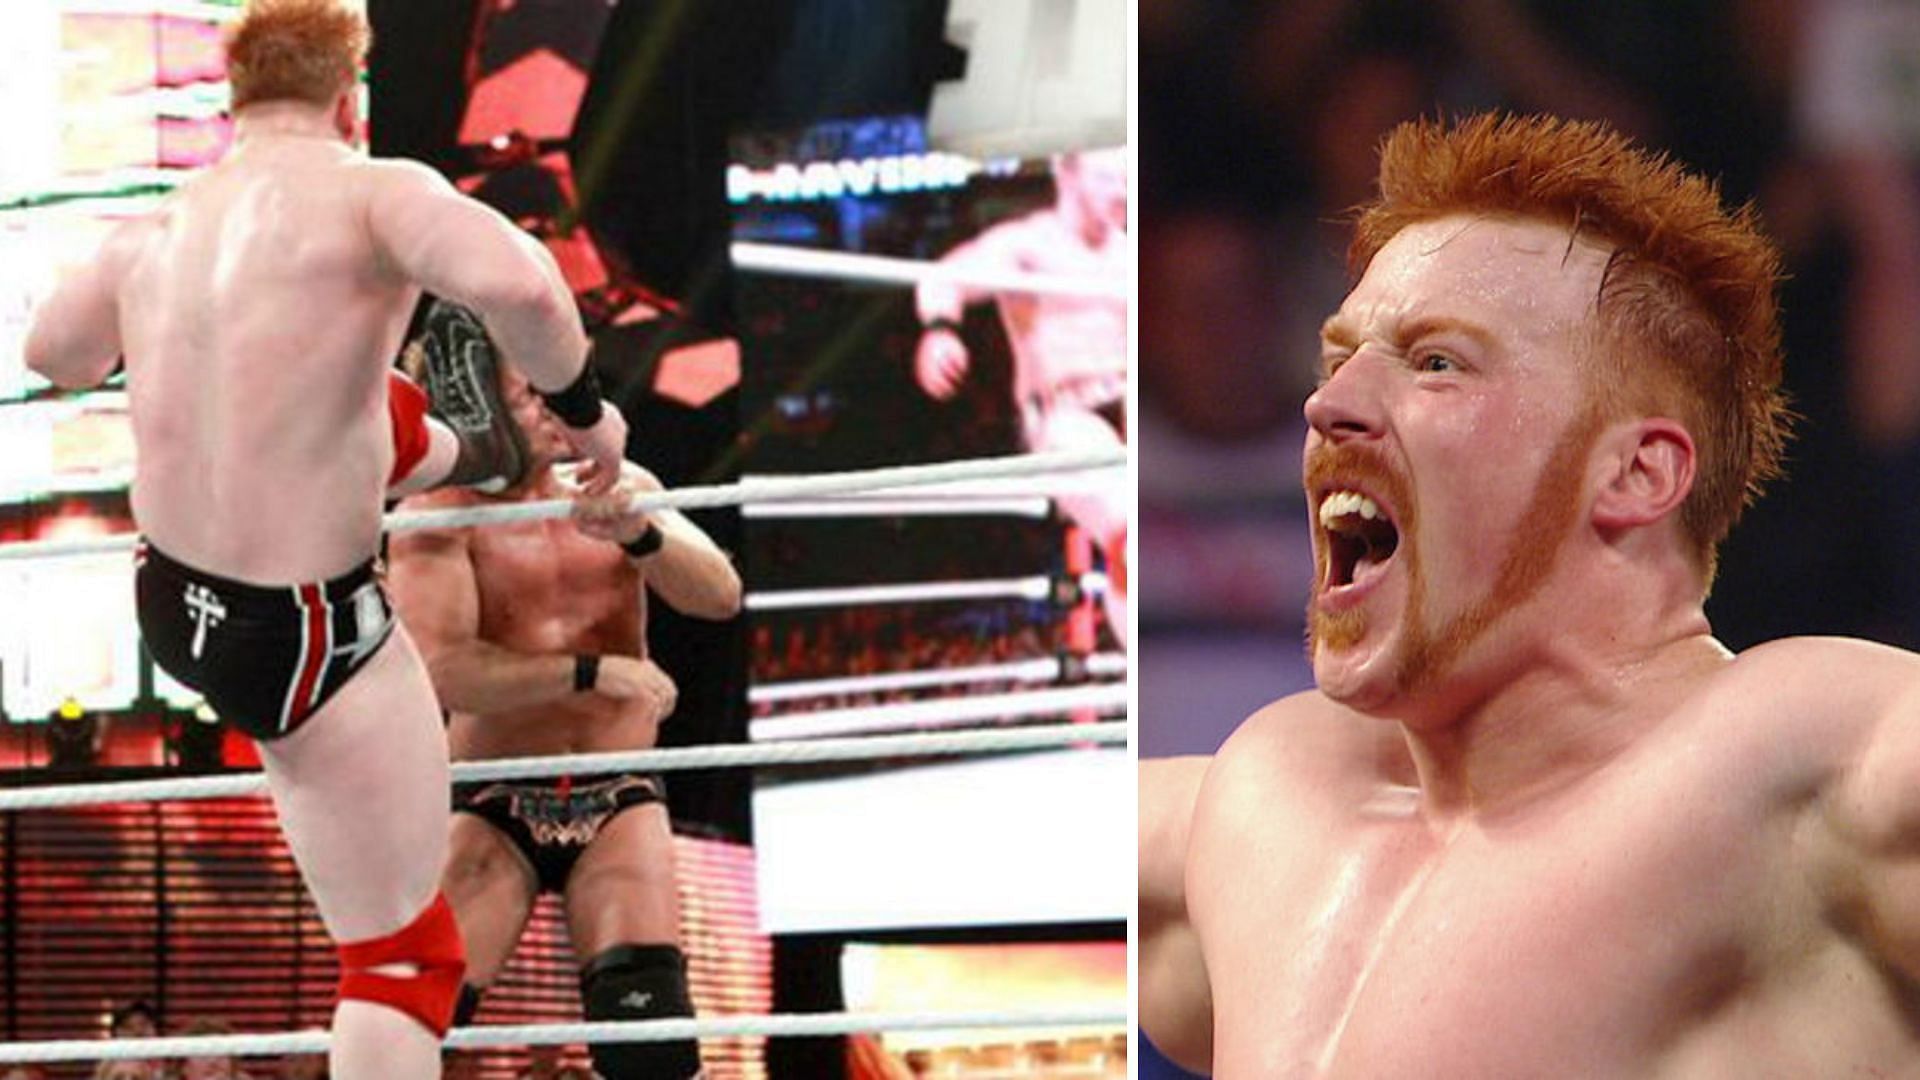 Sheamus won the Rumble in 2012, last eliminating Chris Jericho